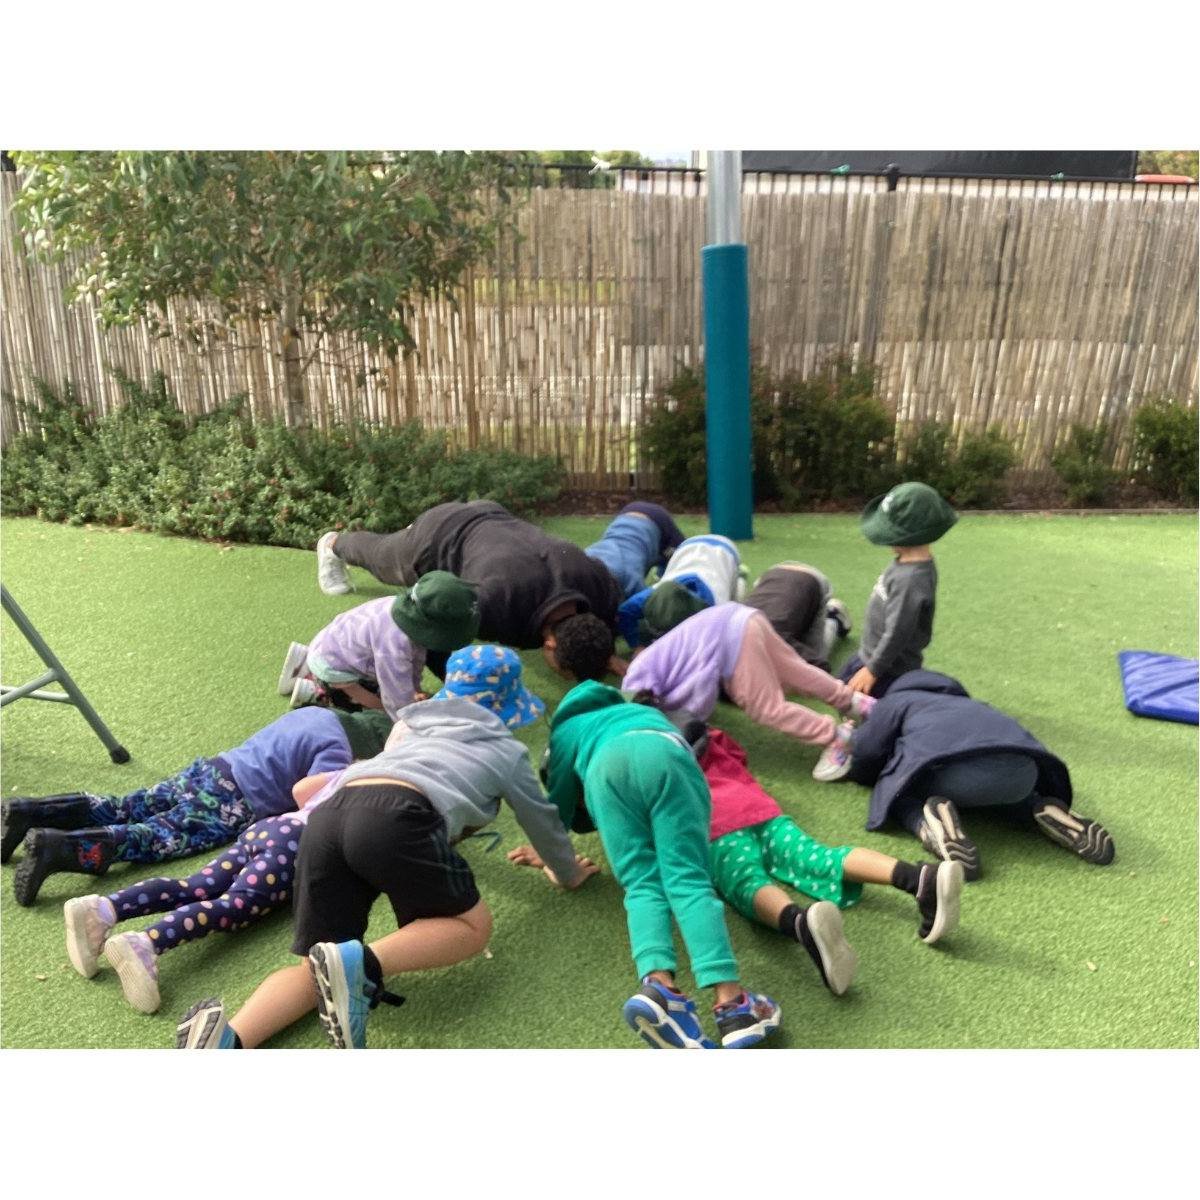 Check out some pictures of our Tiny Explorers and Lively Learners showcasing their skills in our weekly sports program with Jake today.
#heischools #sports #heischoolsdandenongnorth #HEI #childcare